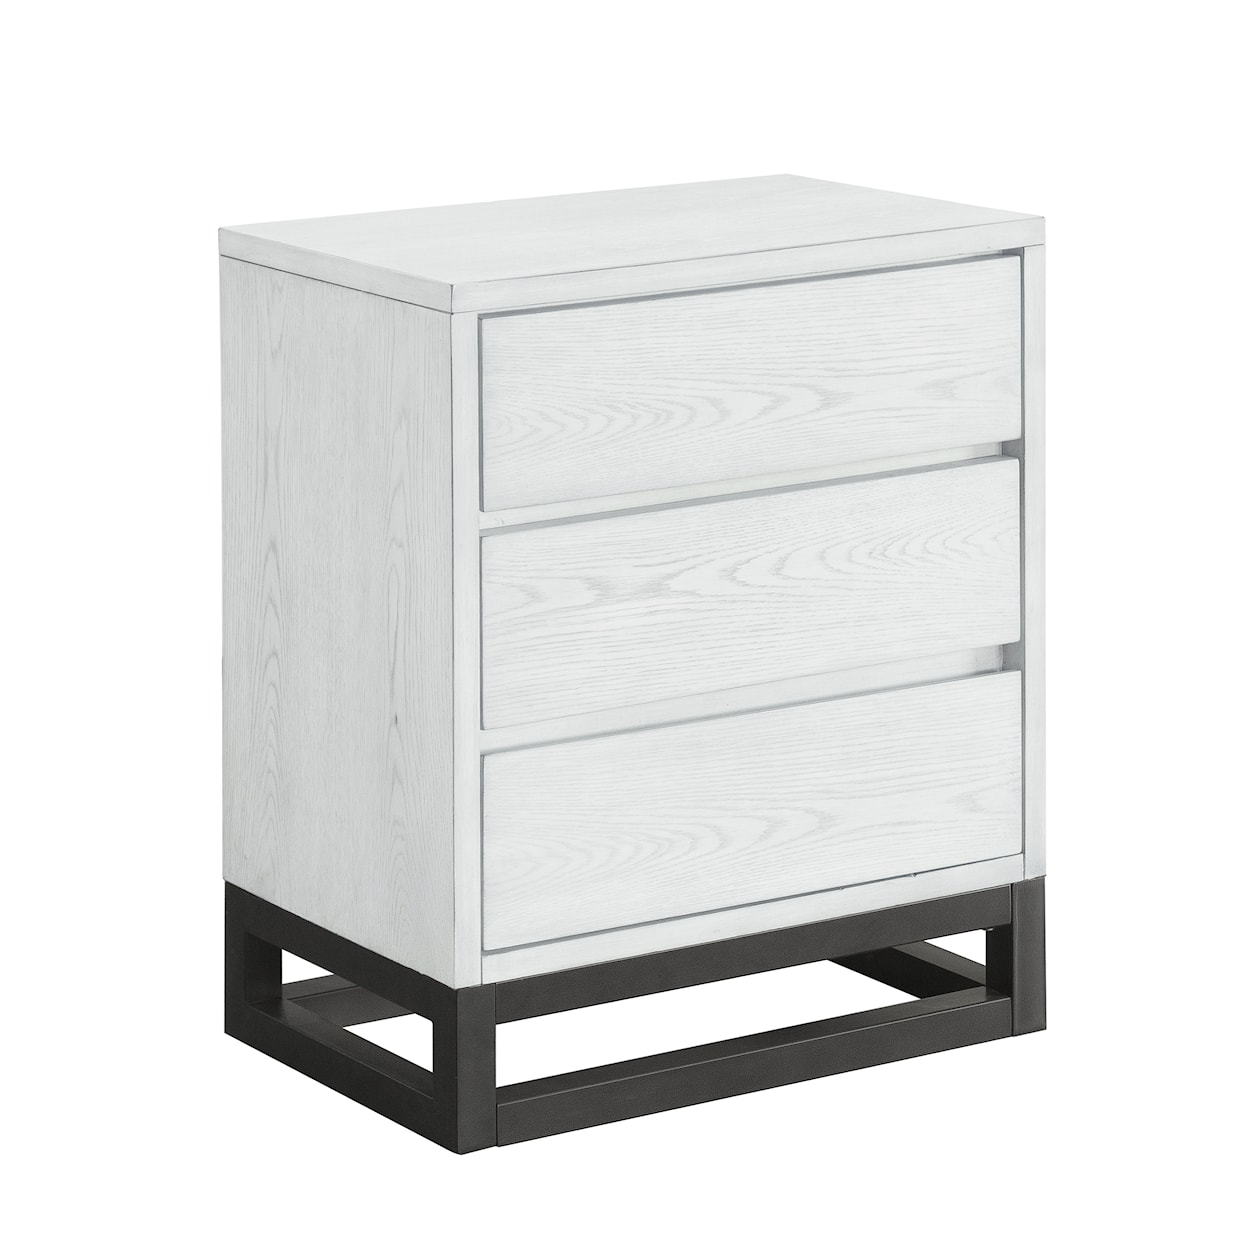 Accentrics Home Accents White Industrial Nightstand